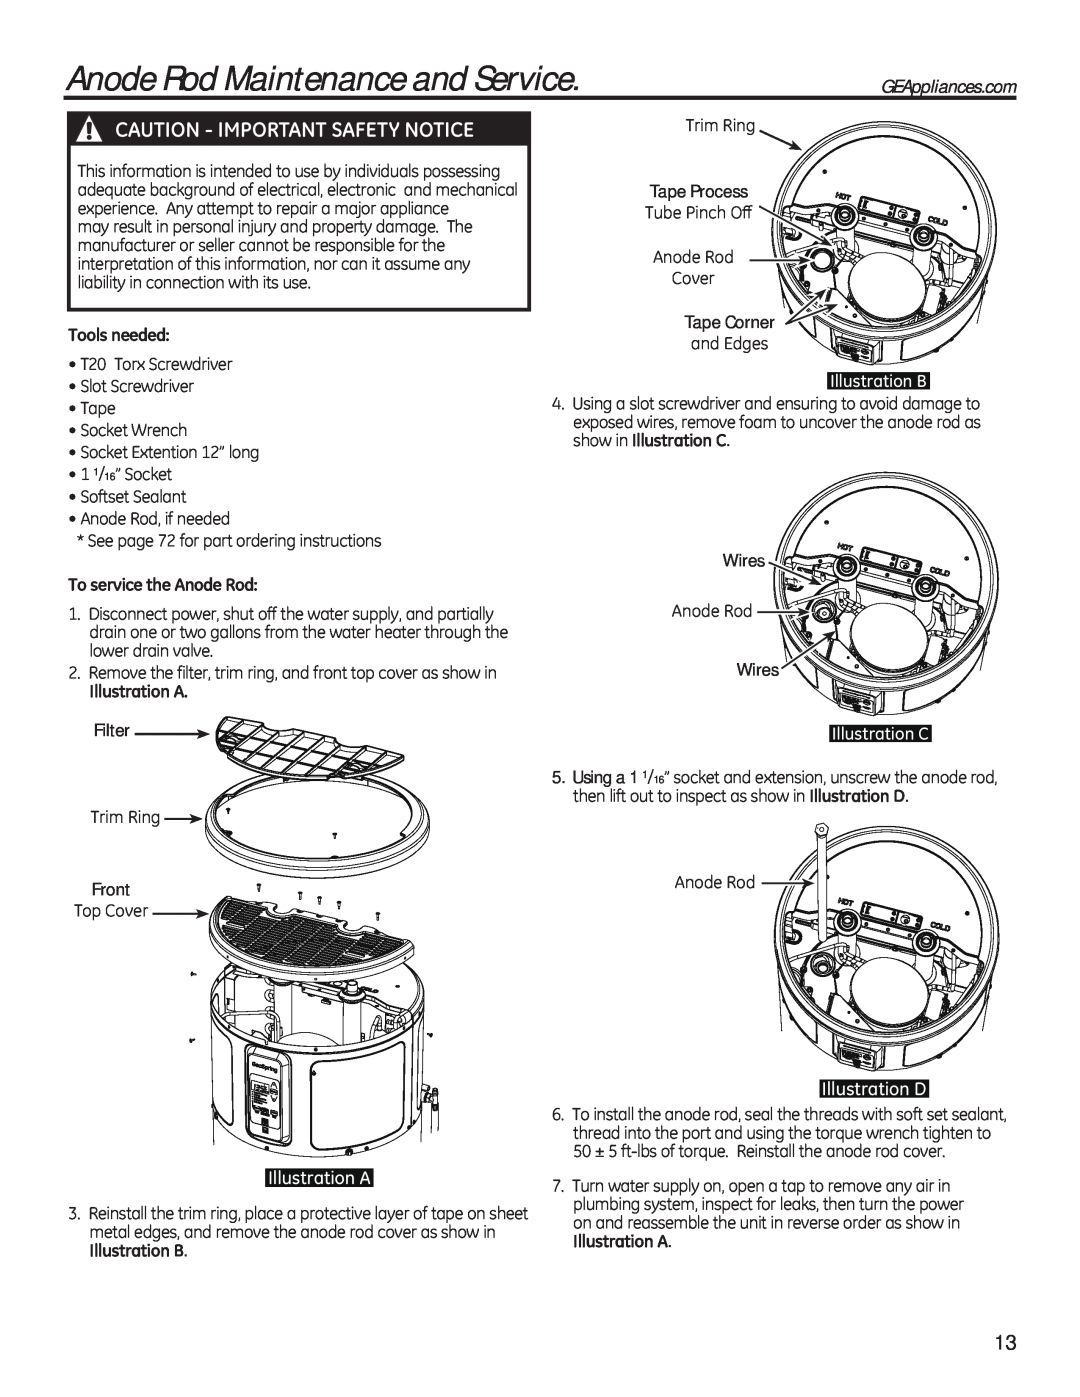 GE 49-50292 Anode Rod Maintenance and Service, Caution - Important Safety Notice, Illustration A, Illustration D 